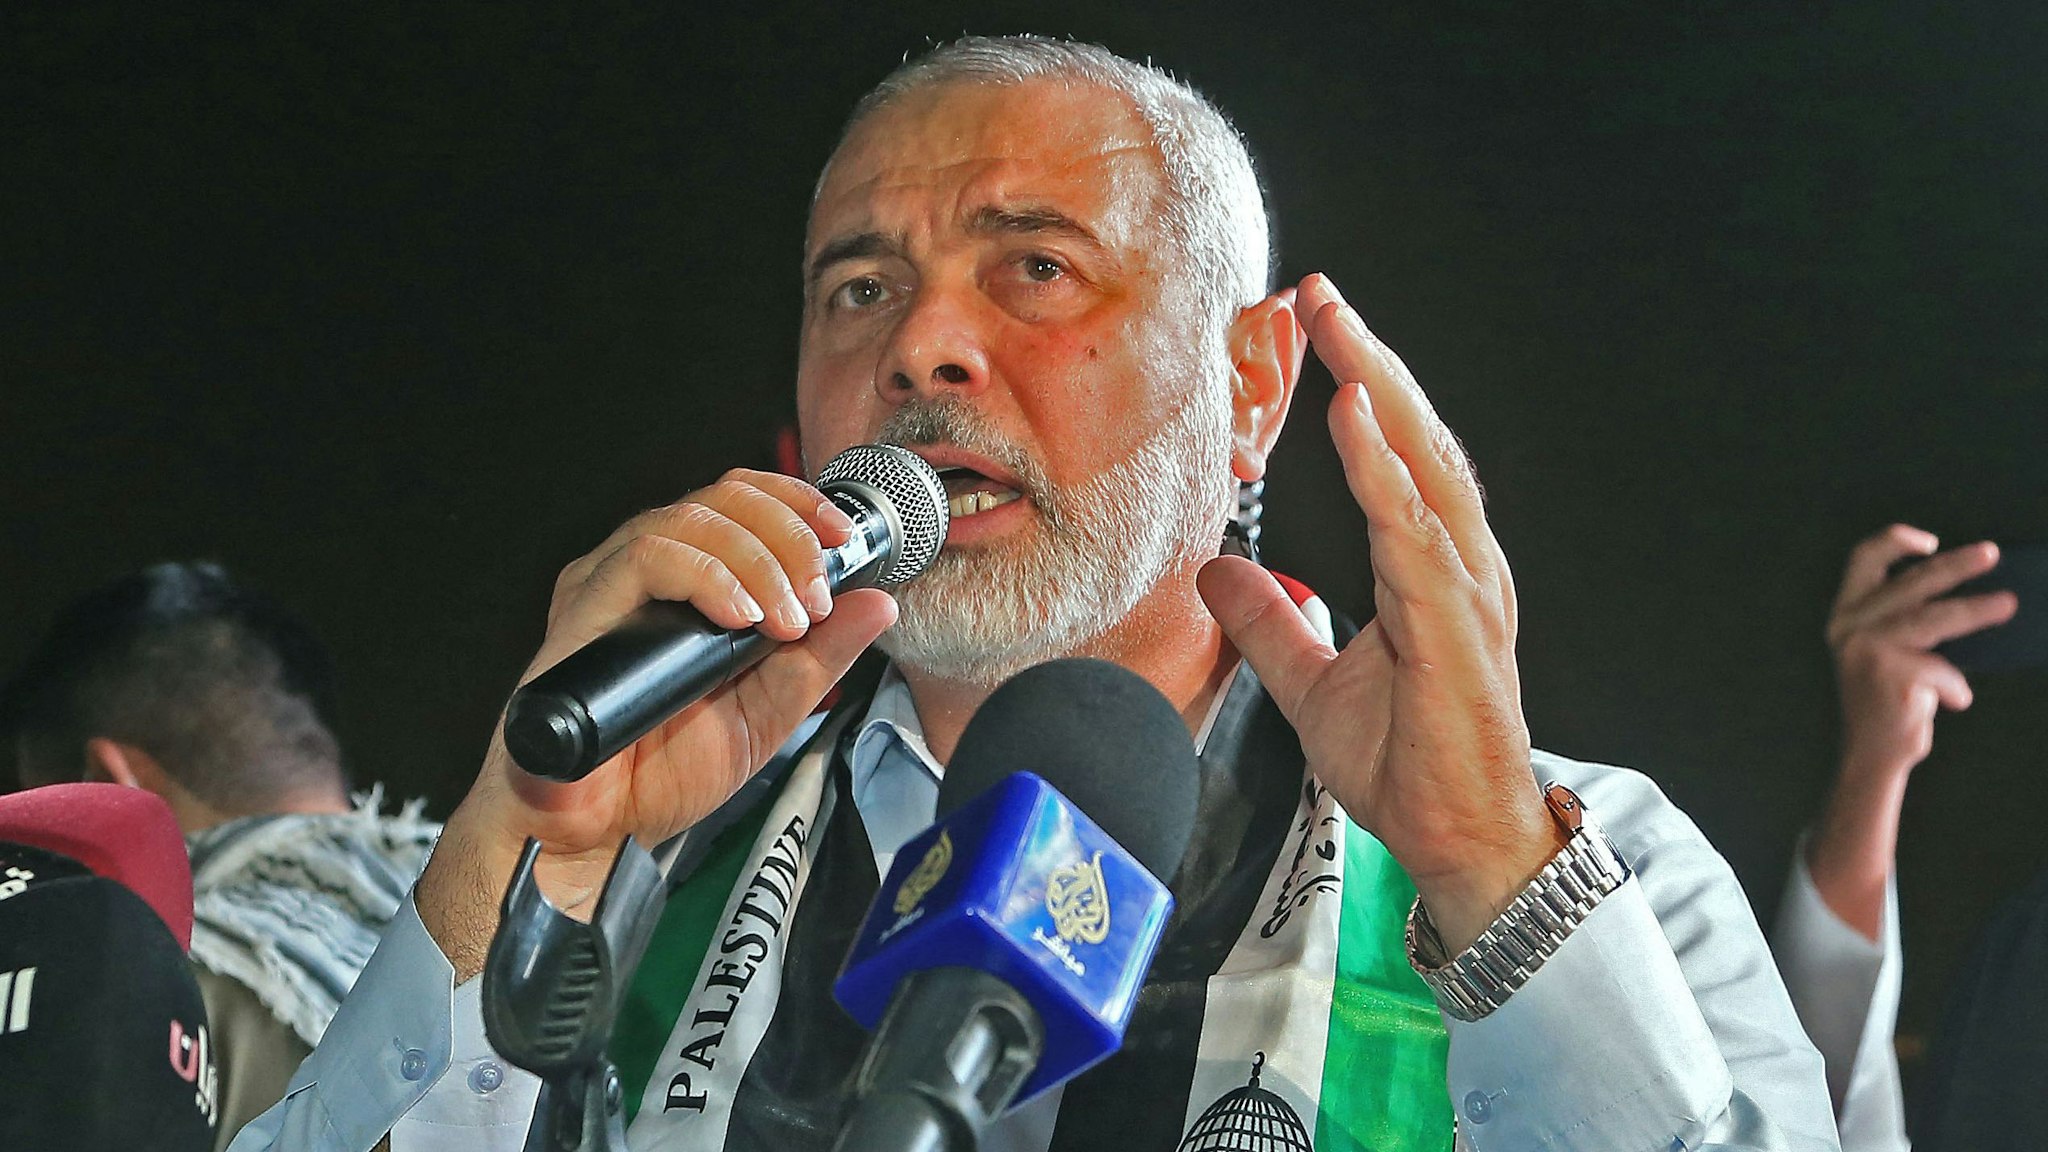 Hamas' political bureau chief Ismail Haniyeh addresses supporters during a rally in solidarity with the Palestinians outside Qatar's Imam Muhammad Abdel-Wahhab Mosque in the capital Doha on May 15, 2021. - Qatar's Foreign Minister hosted the political chief of Palestinian Islamist movement Hamas and called for an end to Israel's bombardment of Gaza, state media said.